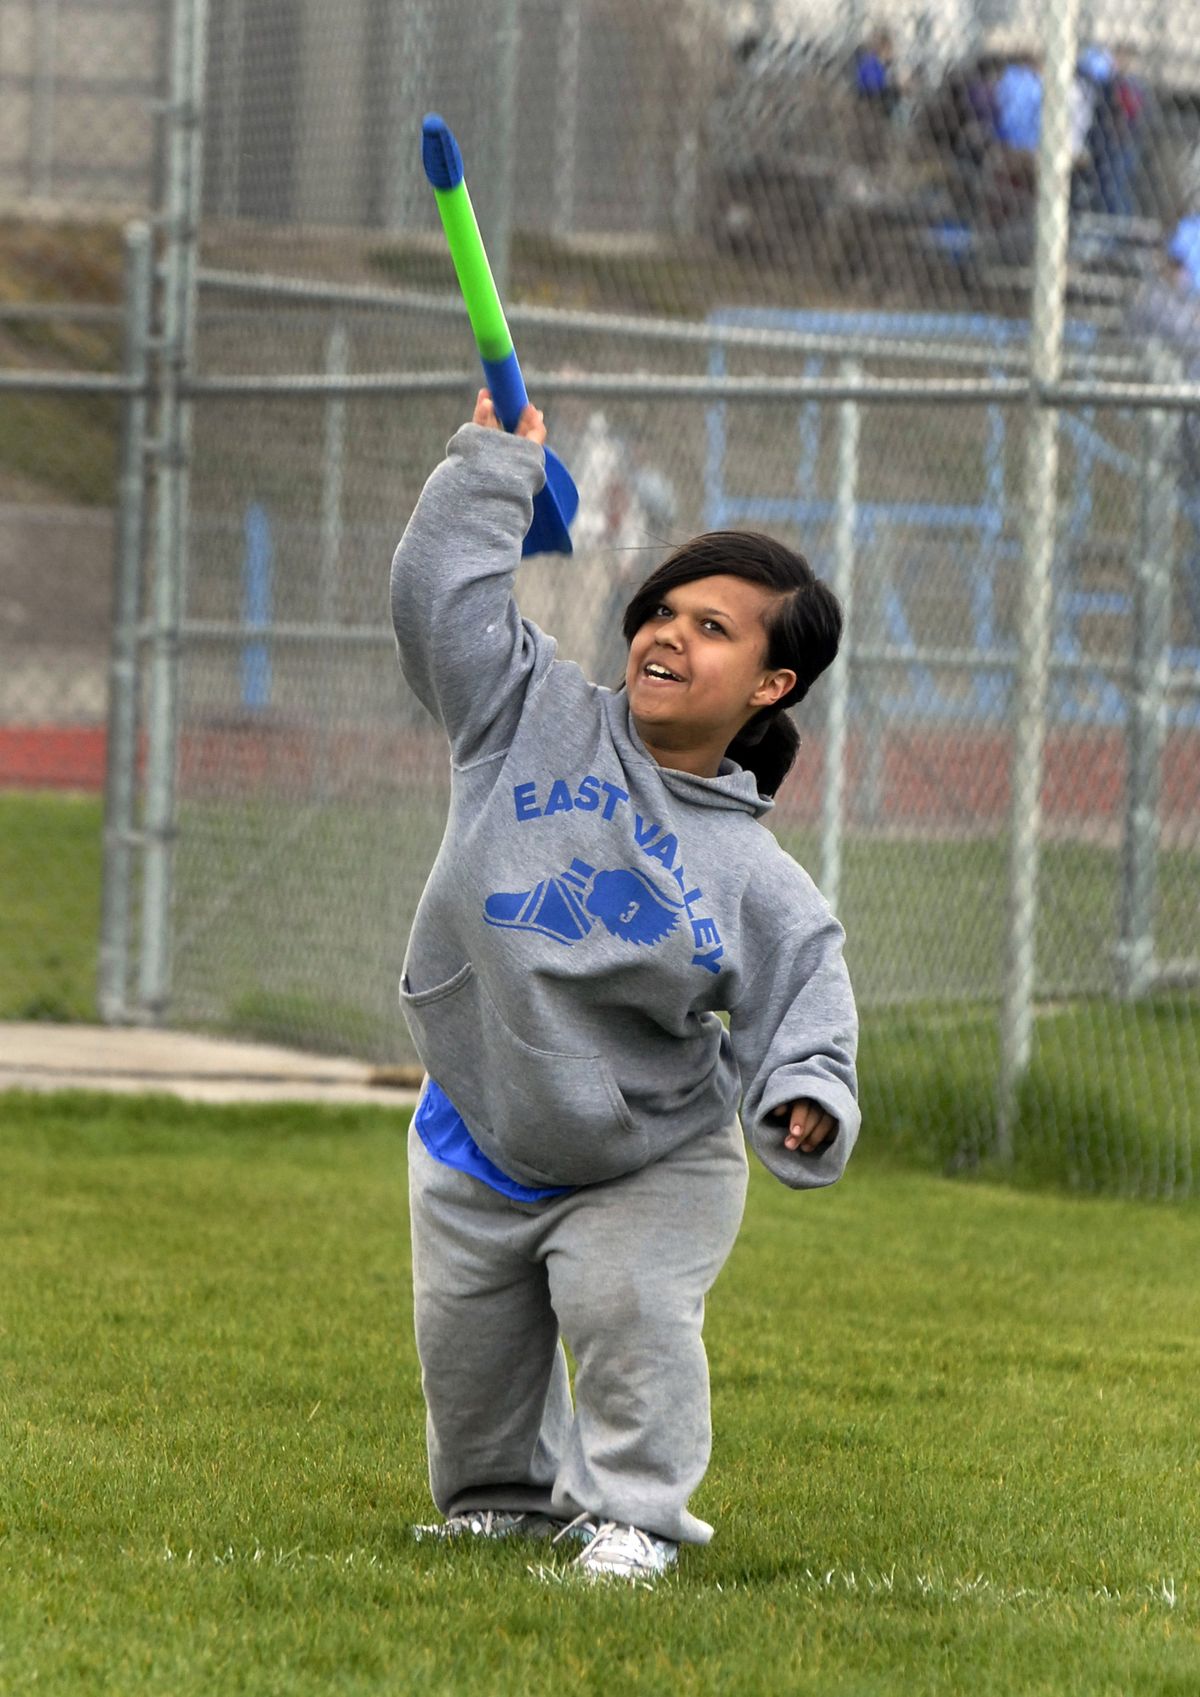 Fourteen-year-old Michelle Kazuba throws the javelin for East Valley Middle School at a track meet on May 14.    (J. BART RAYNIAK / The Spokesman-Review)